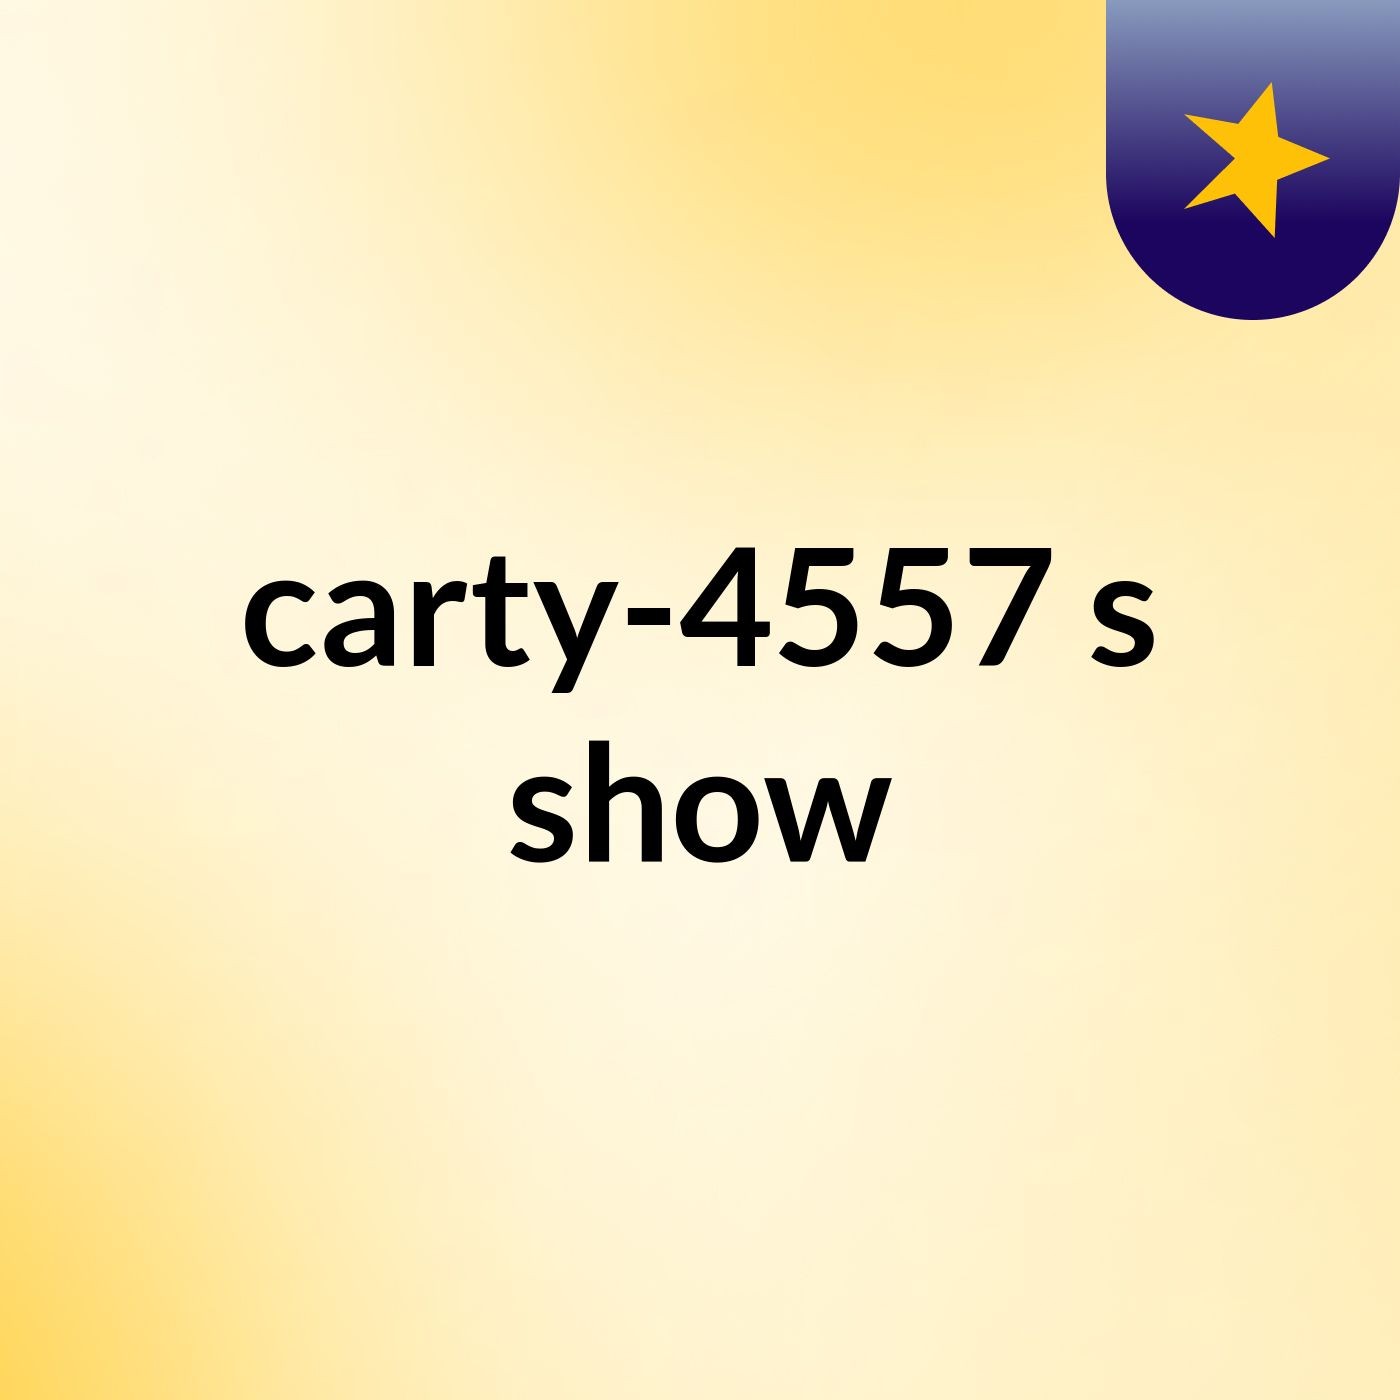 carty-4557's show